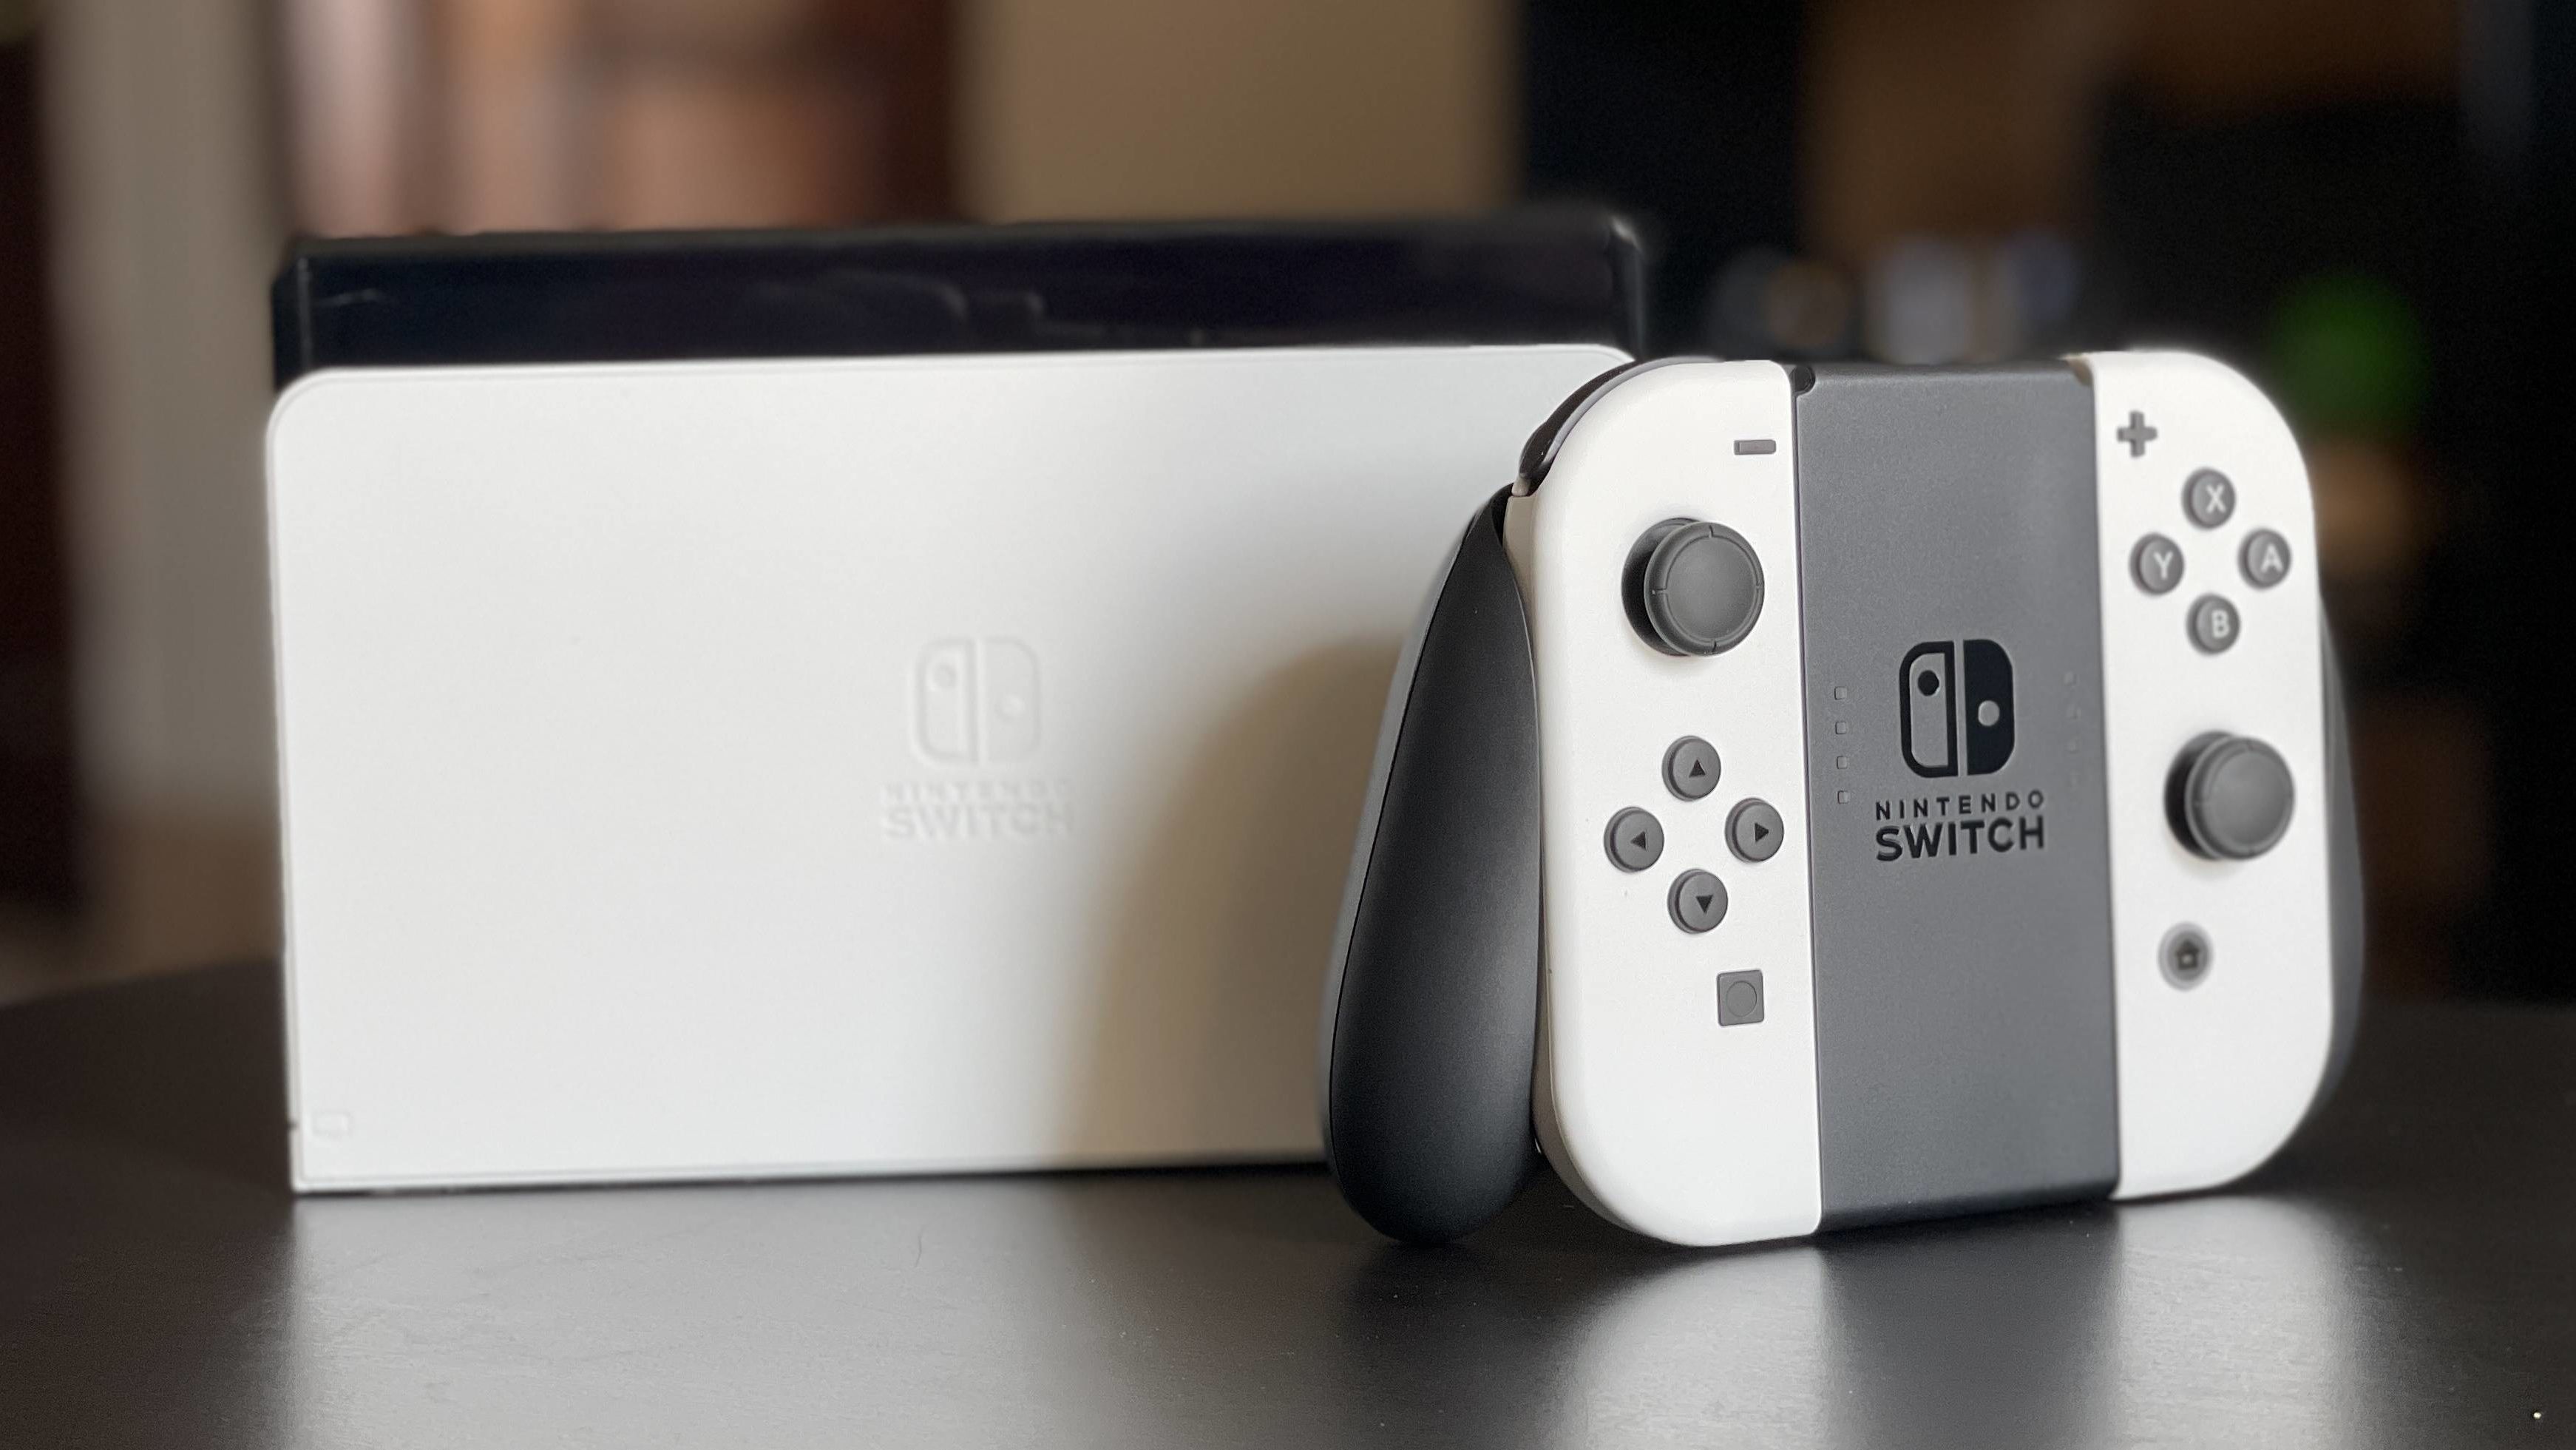 The New Nintendo OLED Switch Is a Small but Punchy Upgrade